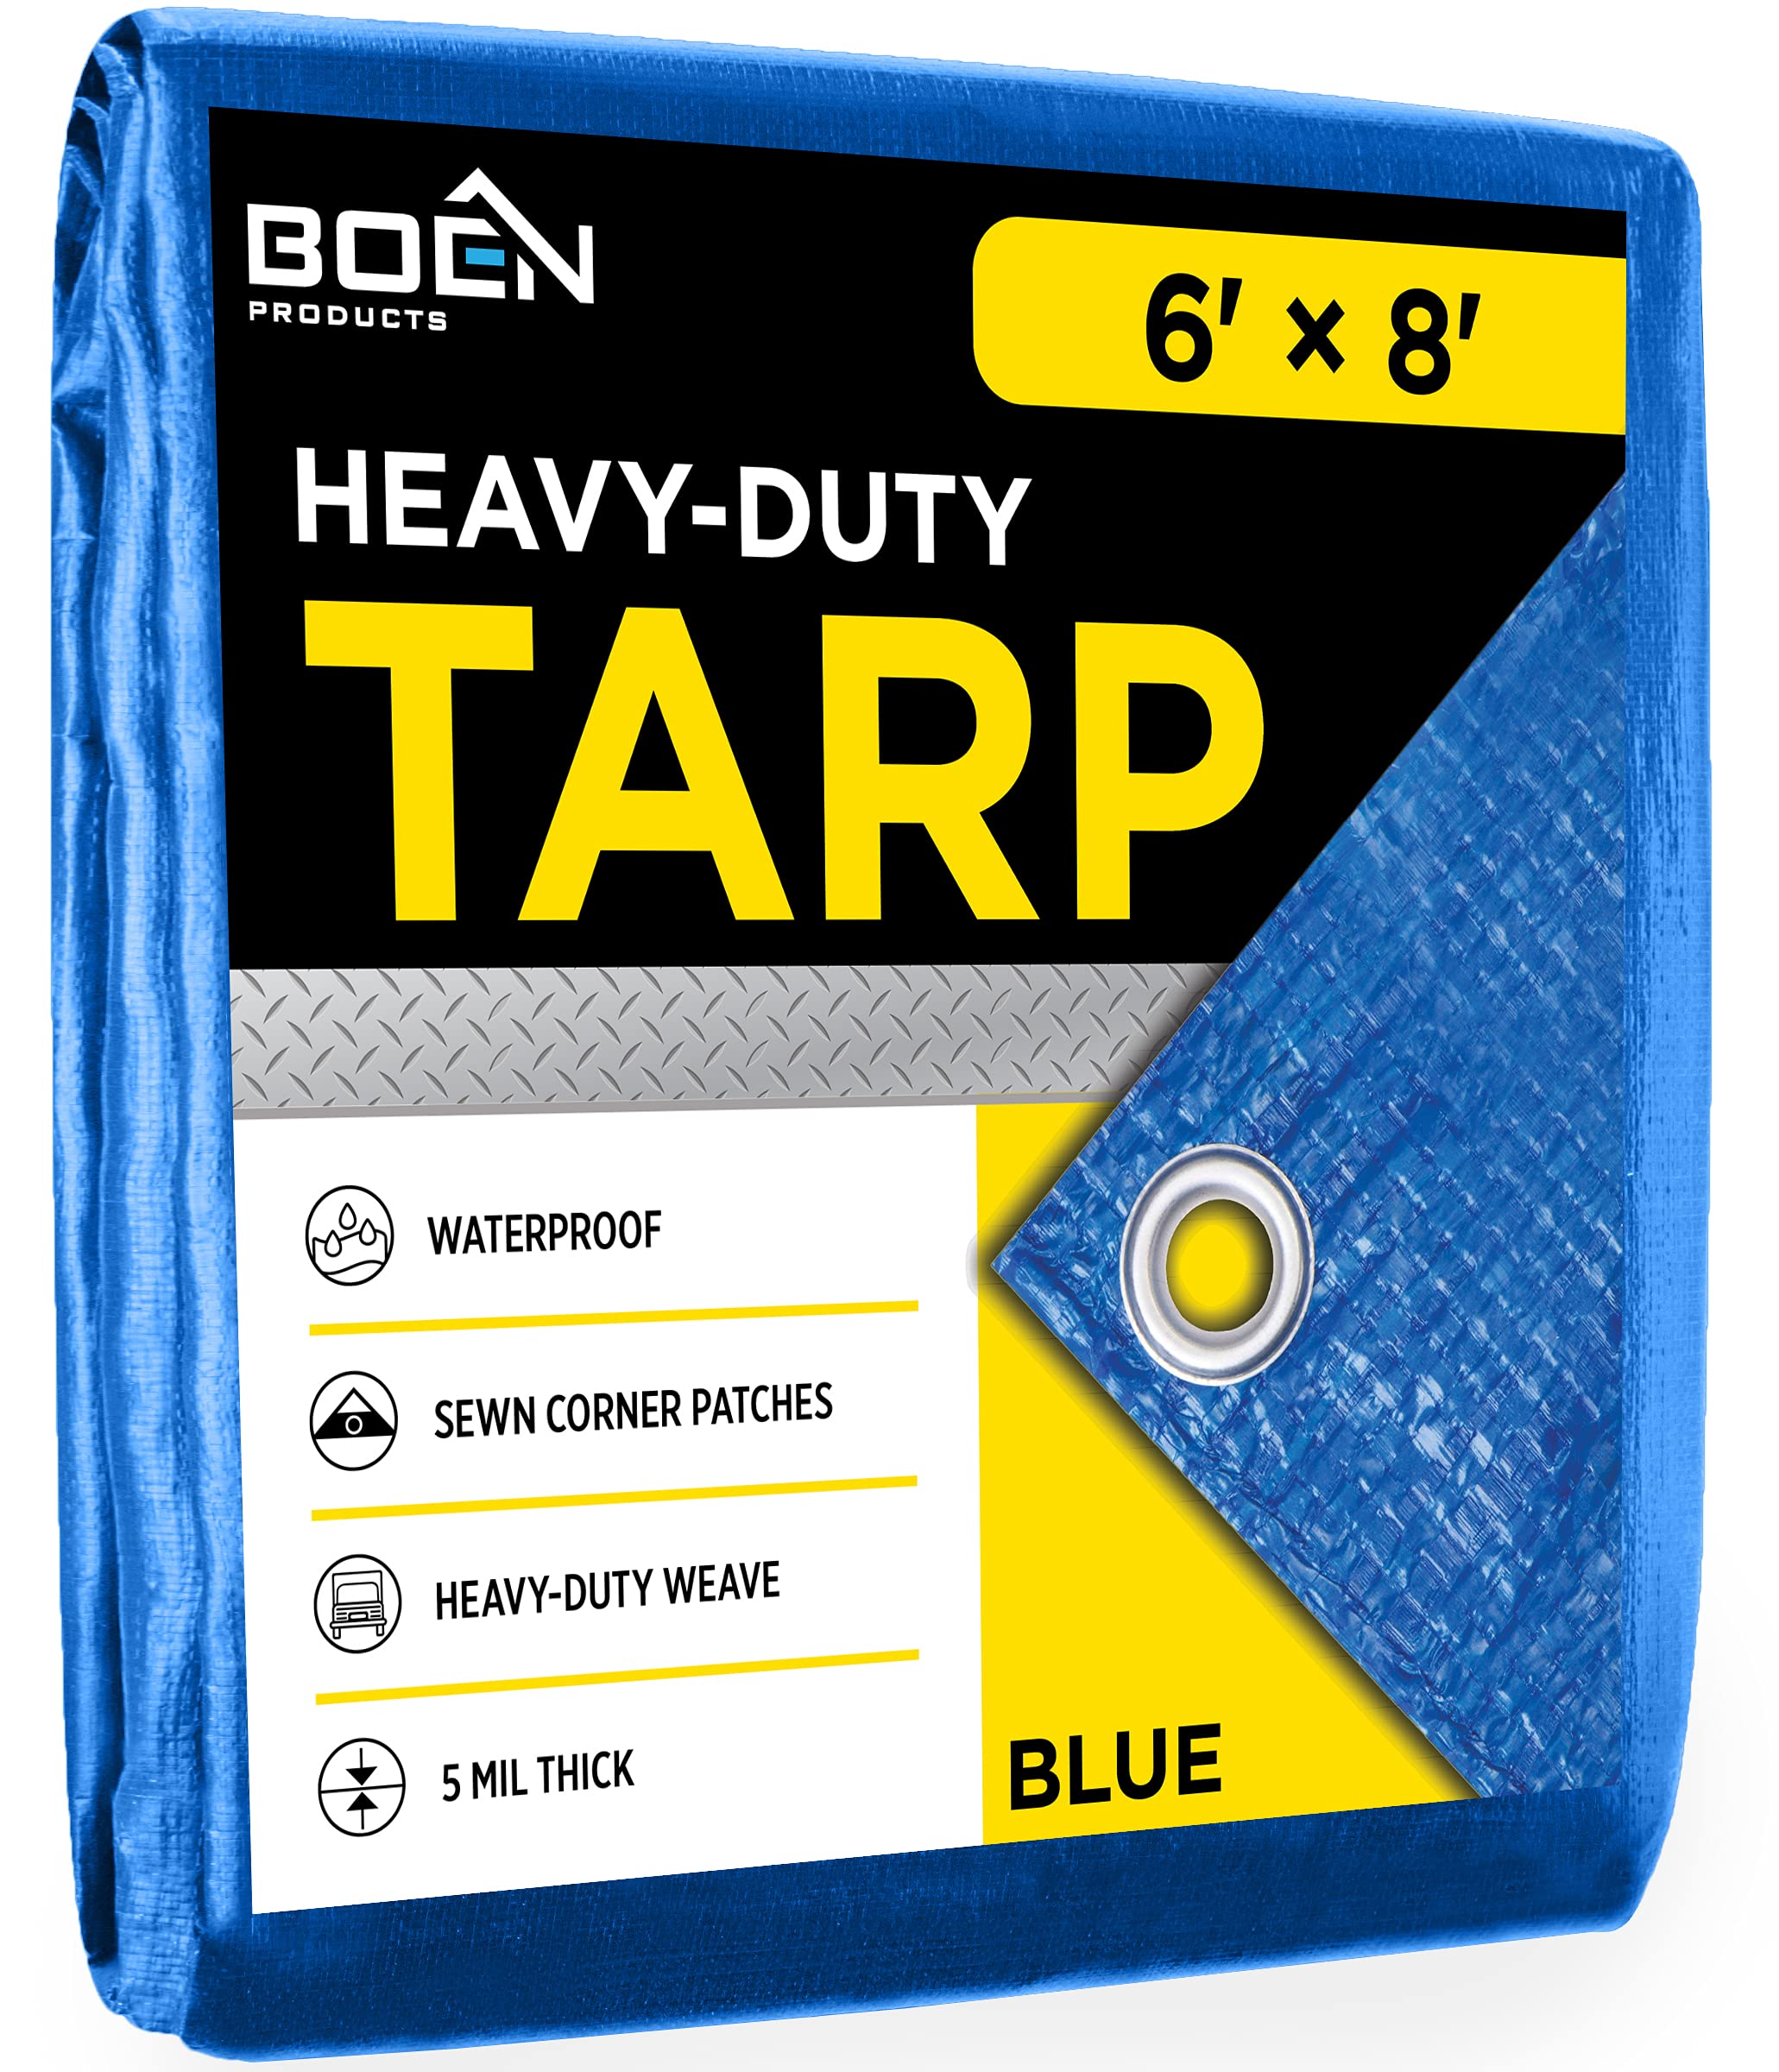 Boen Tarp Heavy Duty Waterproof 10 Mil Thick Material, Multi-Purpose Tarpaulin Great for Canopy Tent, Boat, RV or Pool Cover, Shade and More